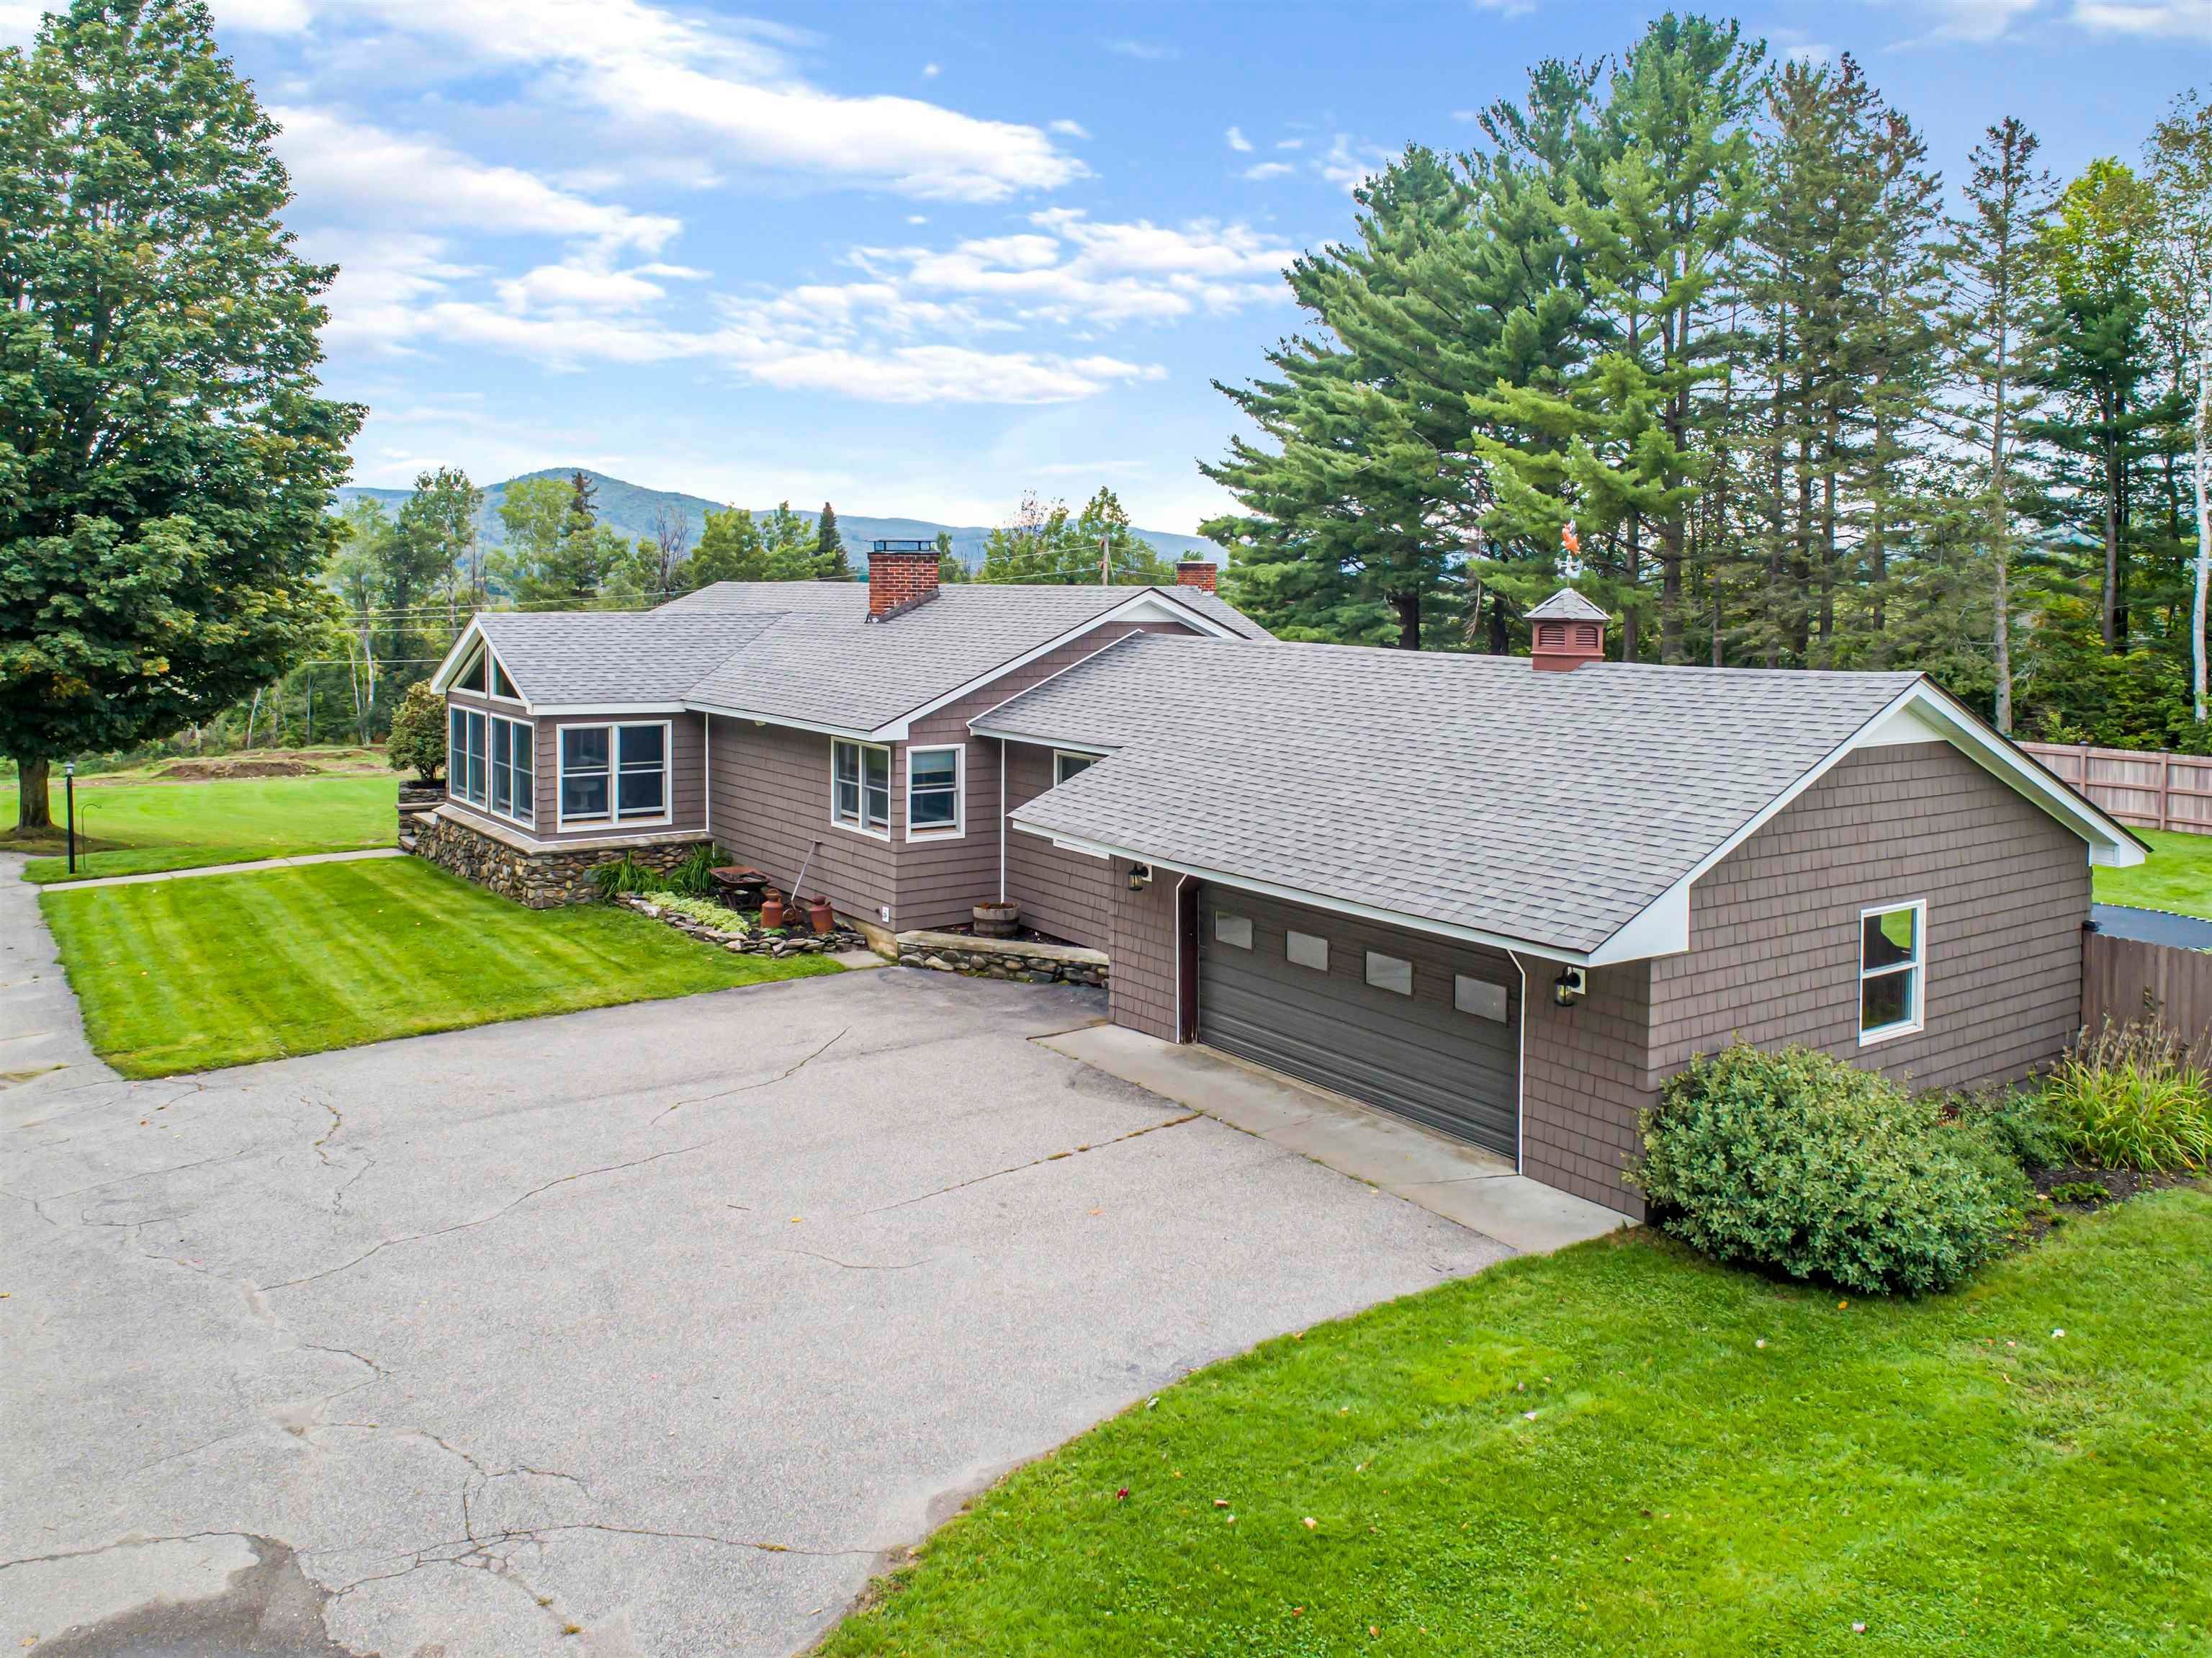 2. Single Family Homes for Sale at Colebrook, NH 03576